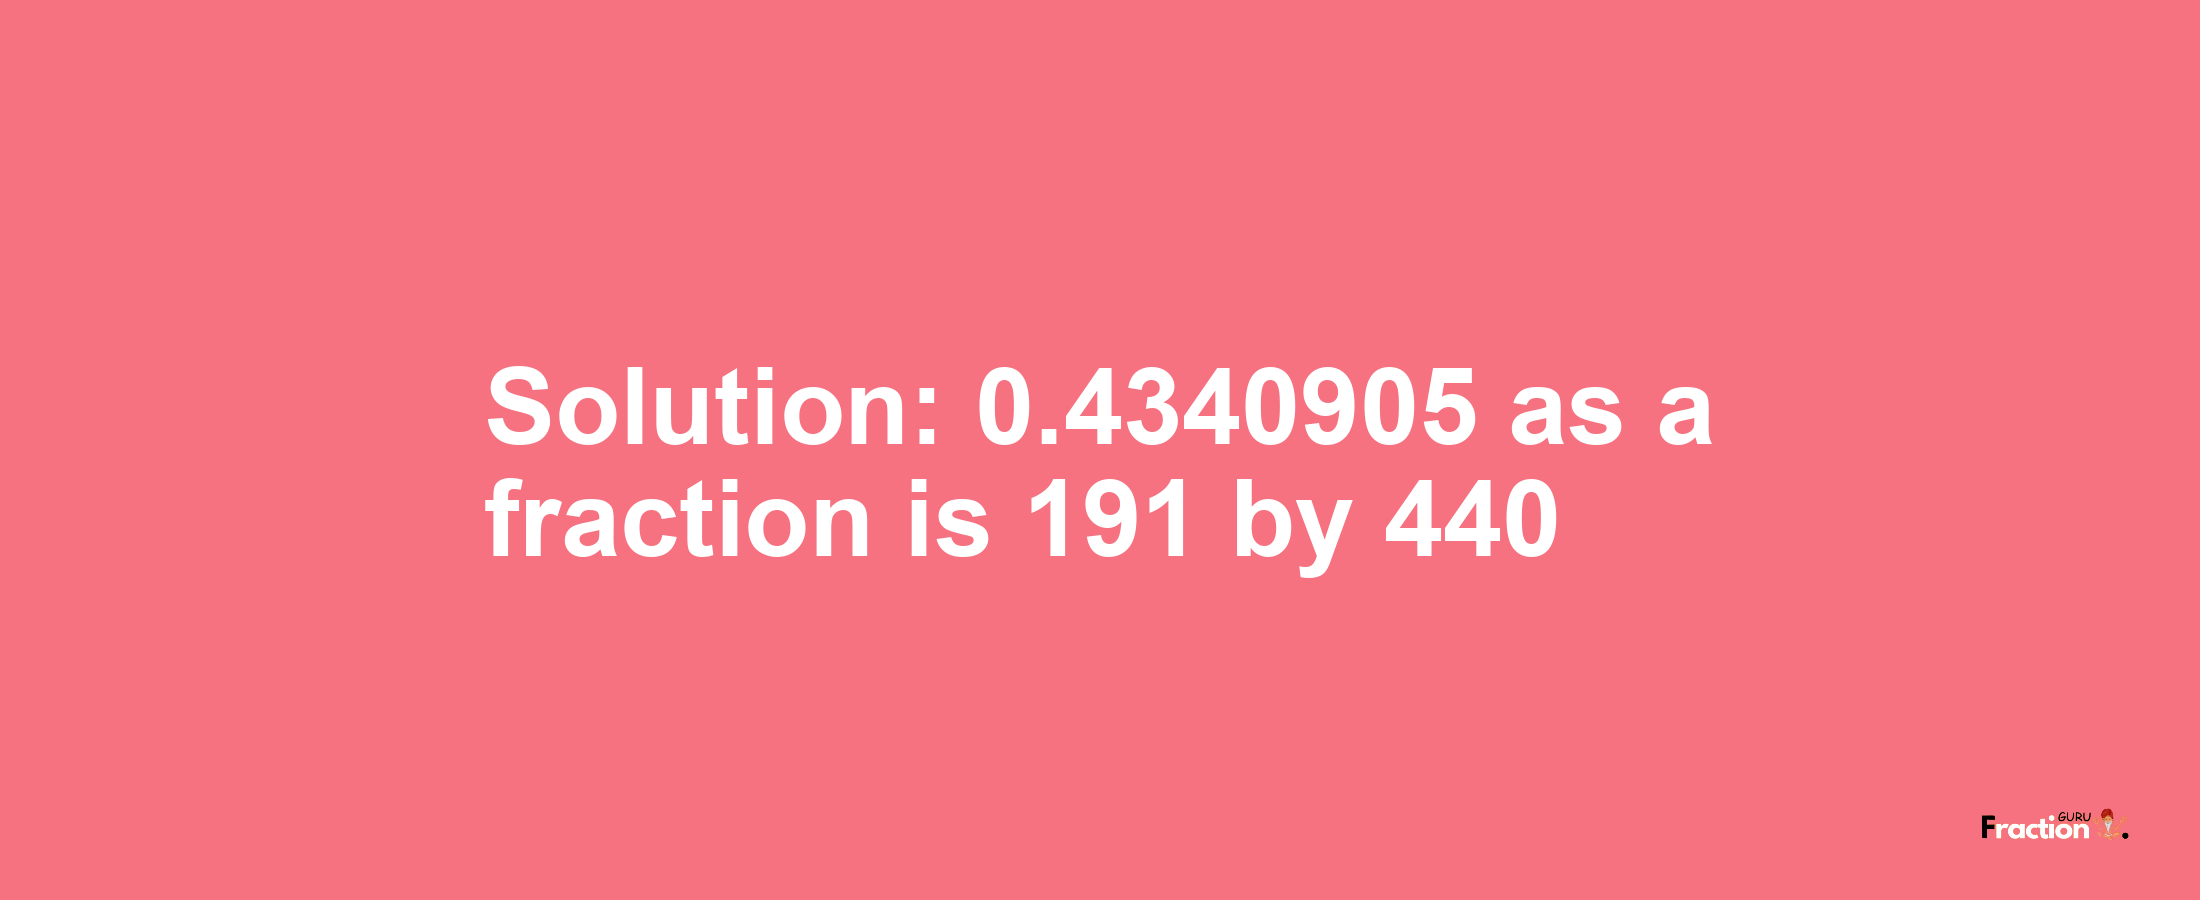 Solution:0.4340905 as a fraction is 191/440